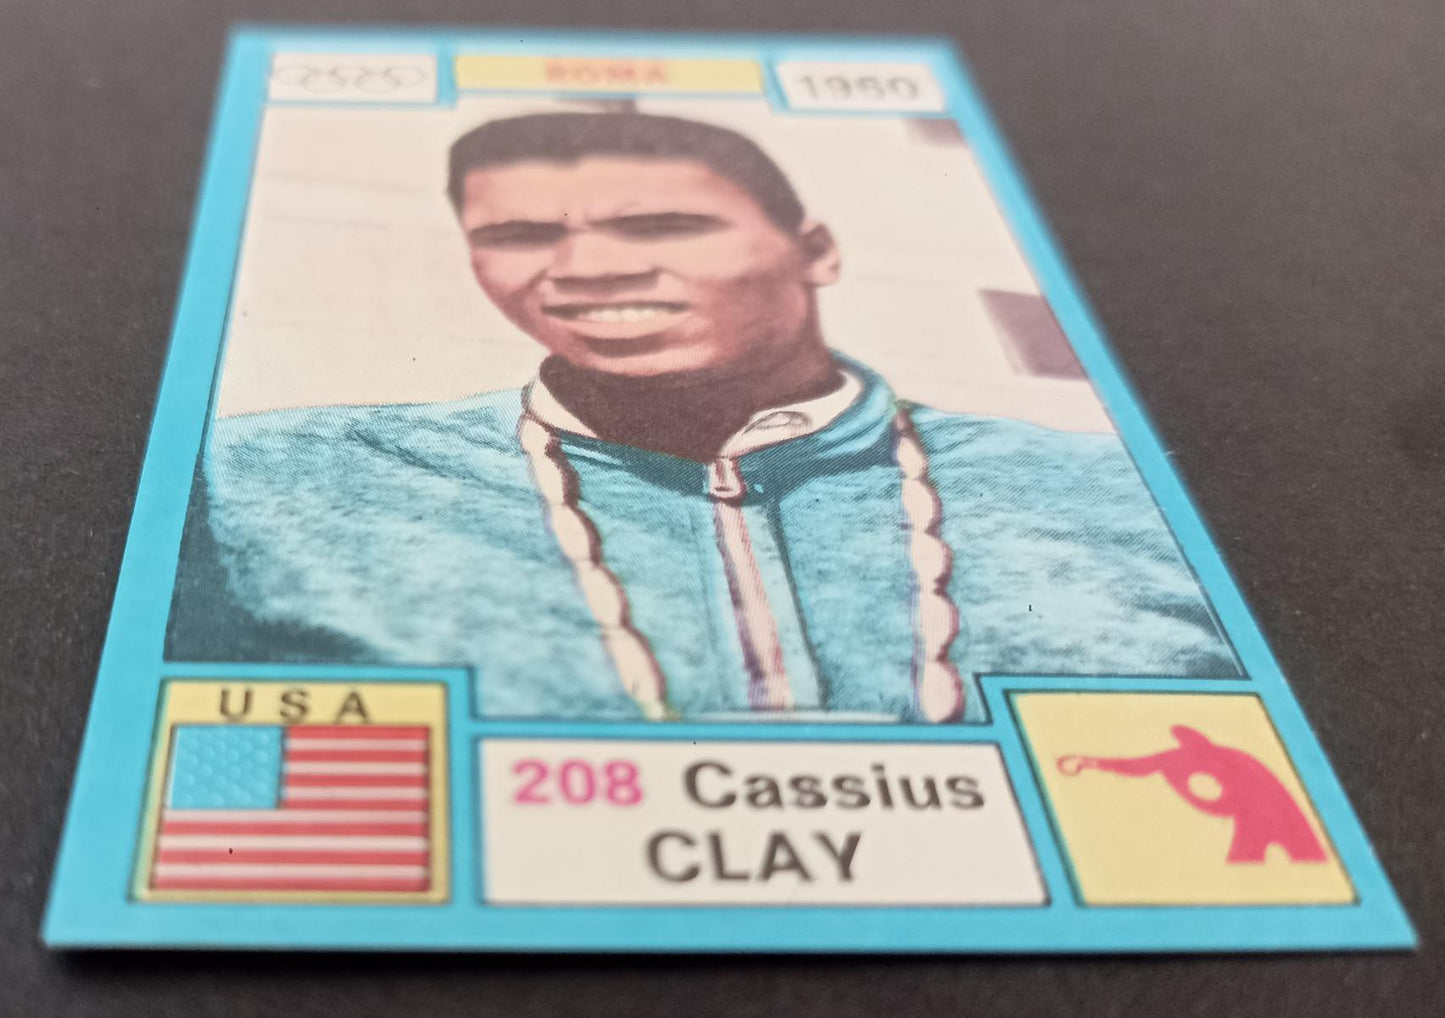 BOXING CARD - PANINI - OLYMPIA 1972 - CASSIUS CLAY MOHAMMED ALI - #208- MINT